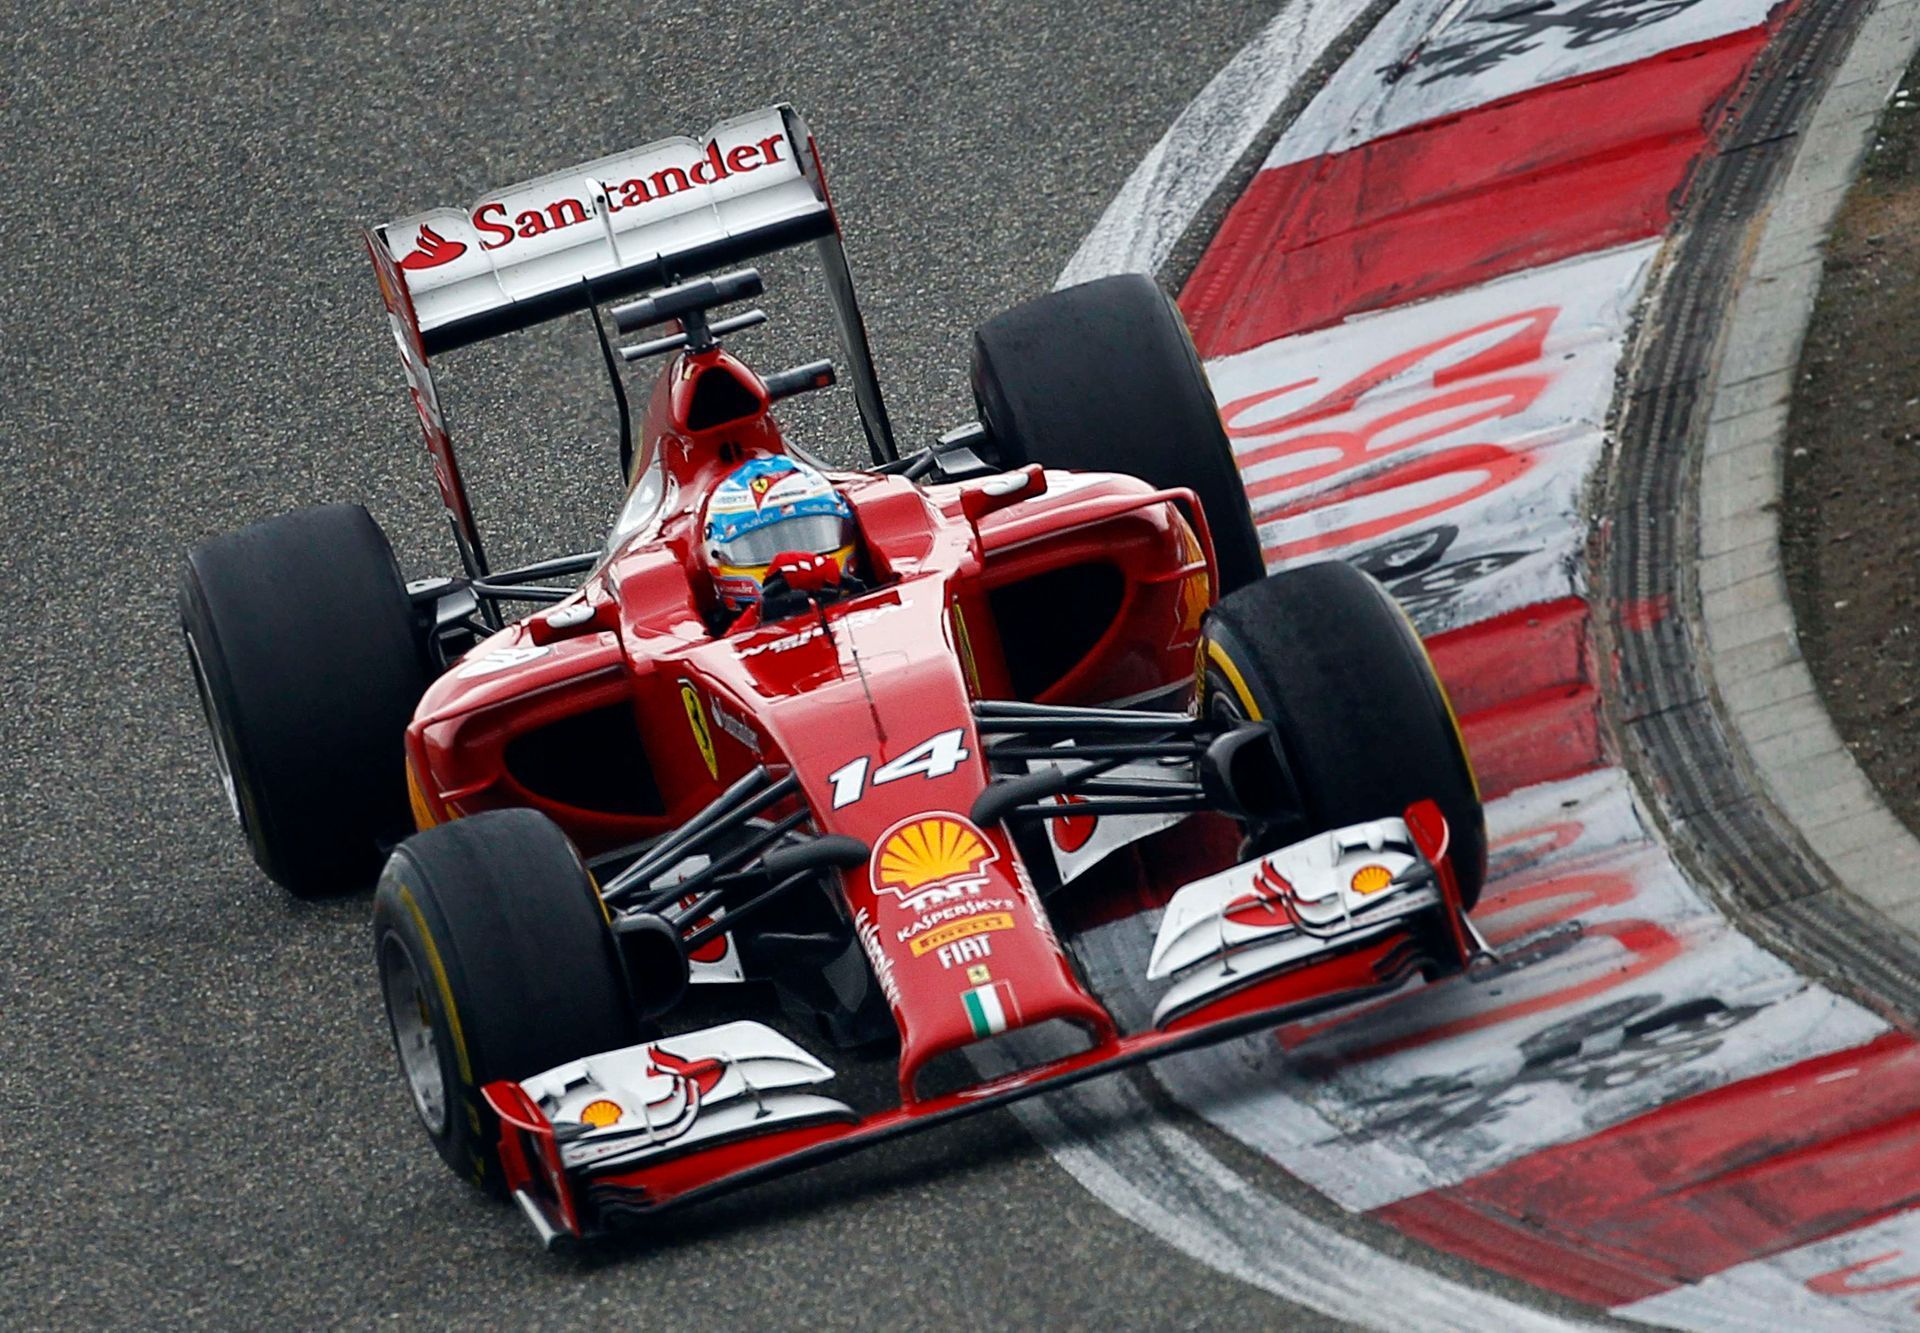 Ferrari Formula One driver Fernando Alonso of Spain drives during the Chinese F1 Grand Prix at the Shanghai International circuit